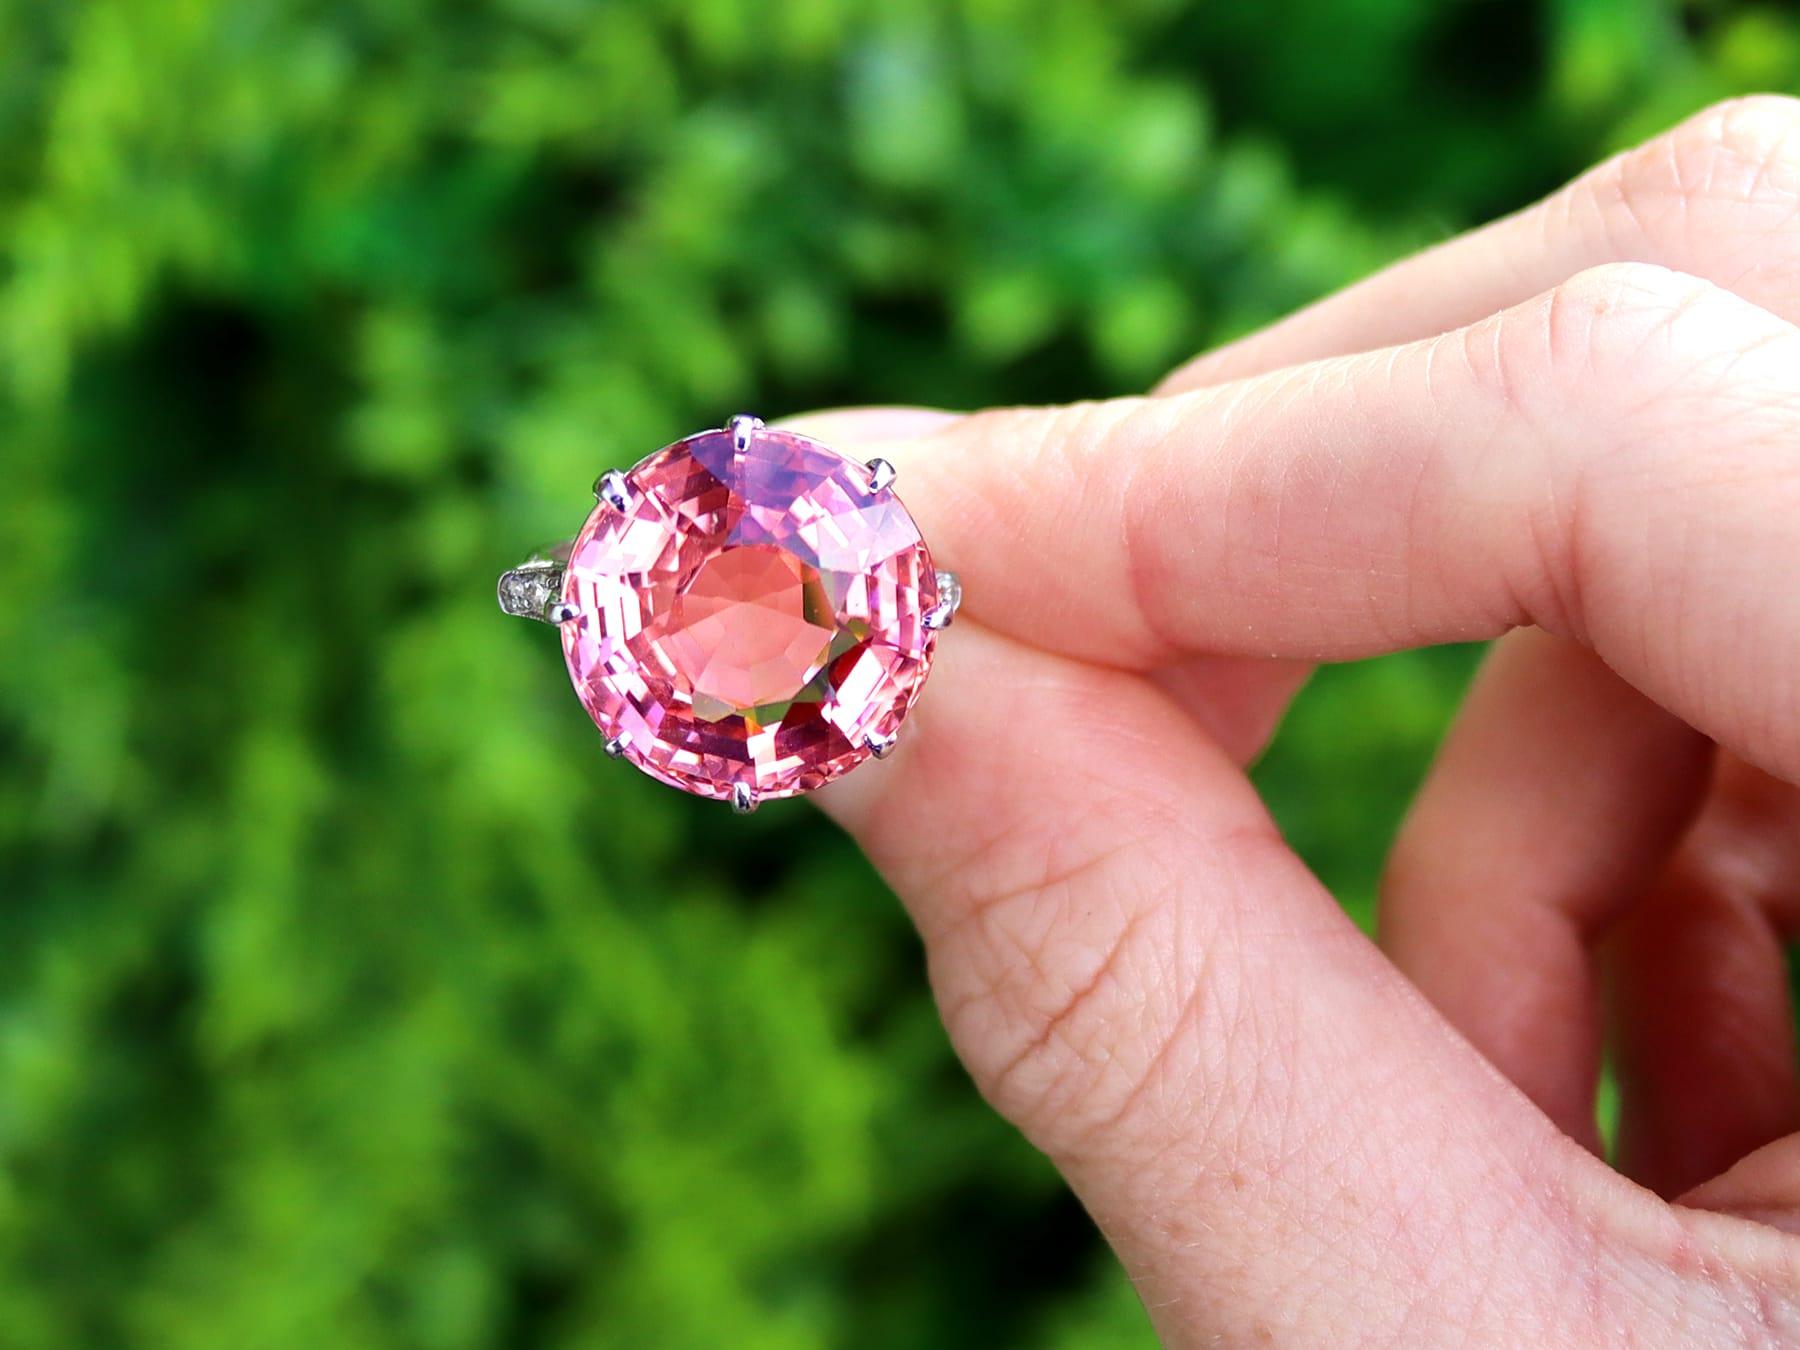 A stunning, fine and impressive 16.41 carat pink tourmaline and 0.12 carat diamond, 18 karat white gold dress ring; part of our vintage engagement ring collection.

This stunning, fine and impressive pink tourmaline ring has been crafted in 18k